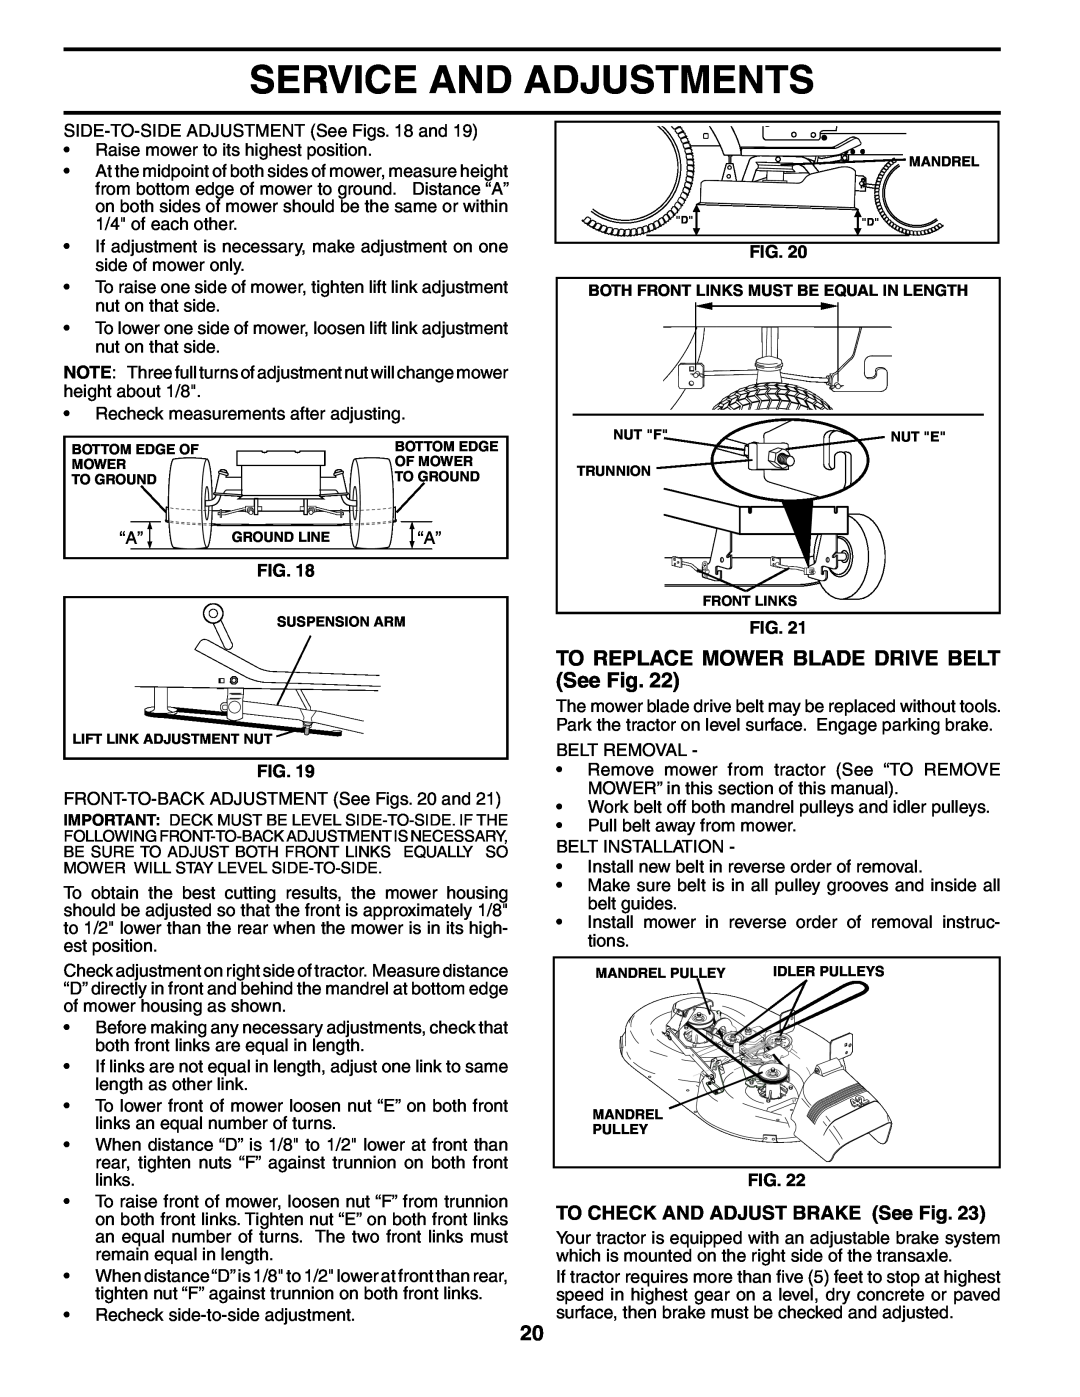 Poulan 954569561 TO REPLACE MOWER BLADE DRIVE BELT See Fig, Service And Adjustments, TO CHECK AND ADJUST BRAKE See Fig 